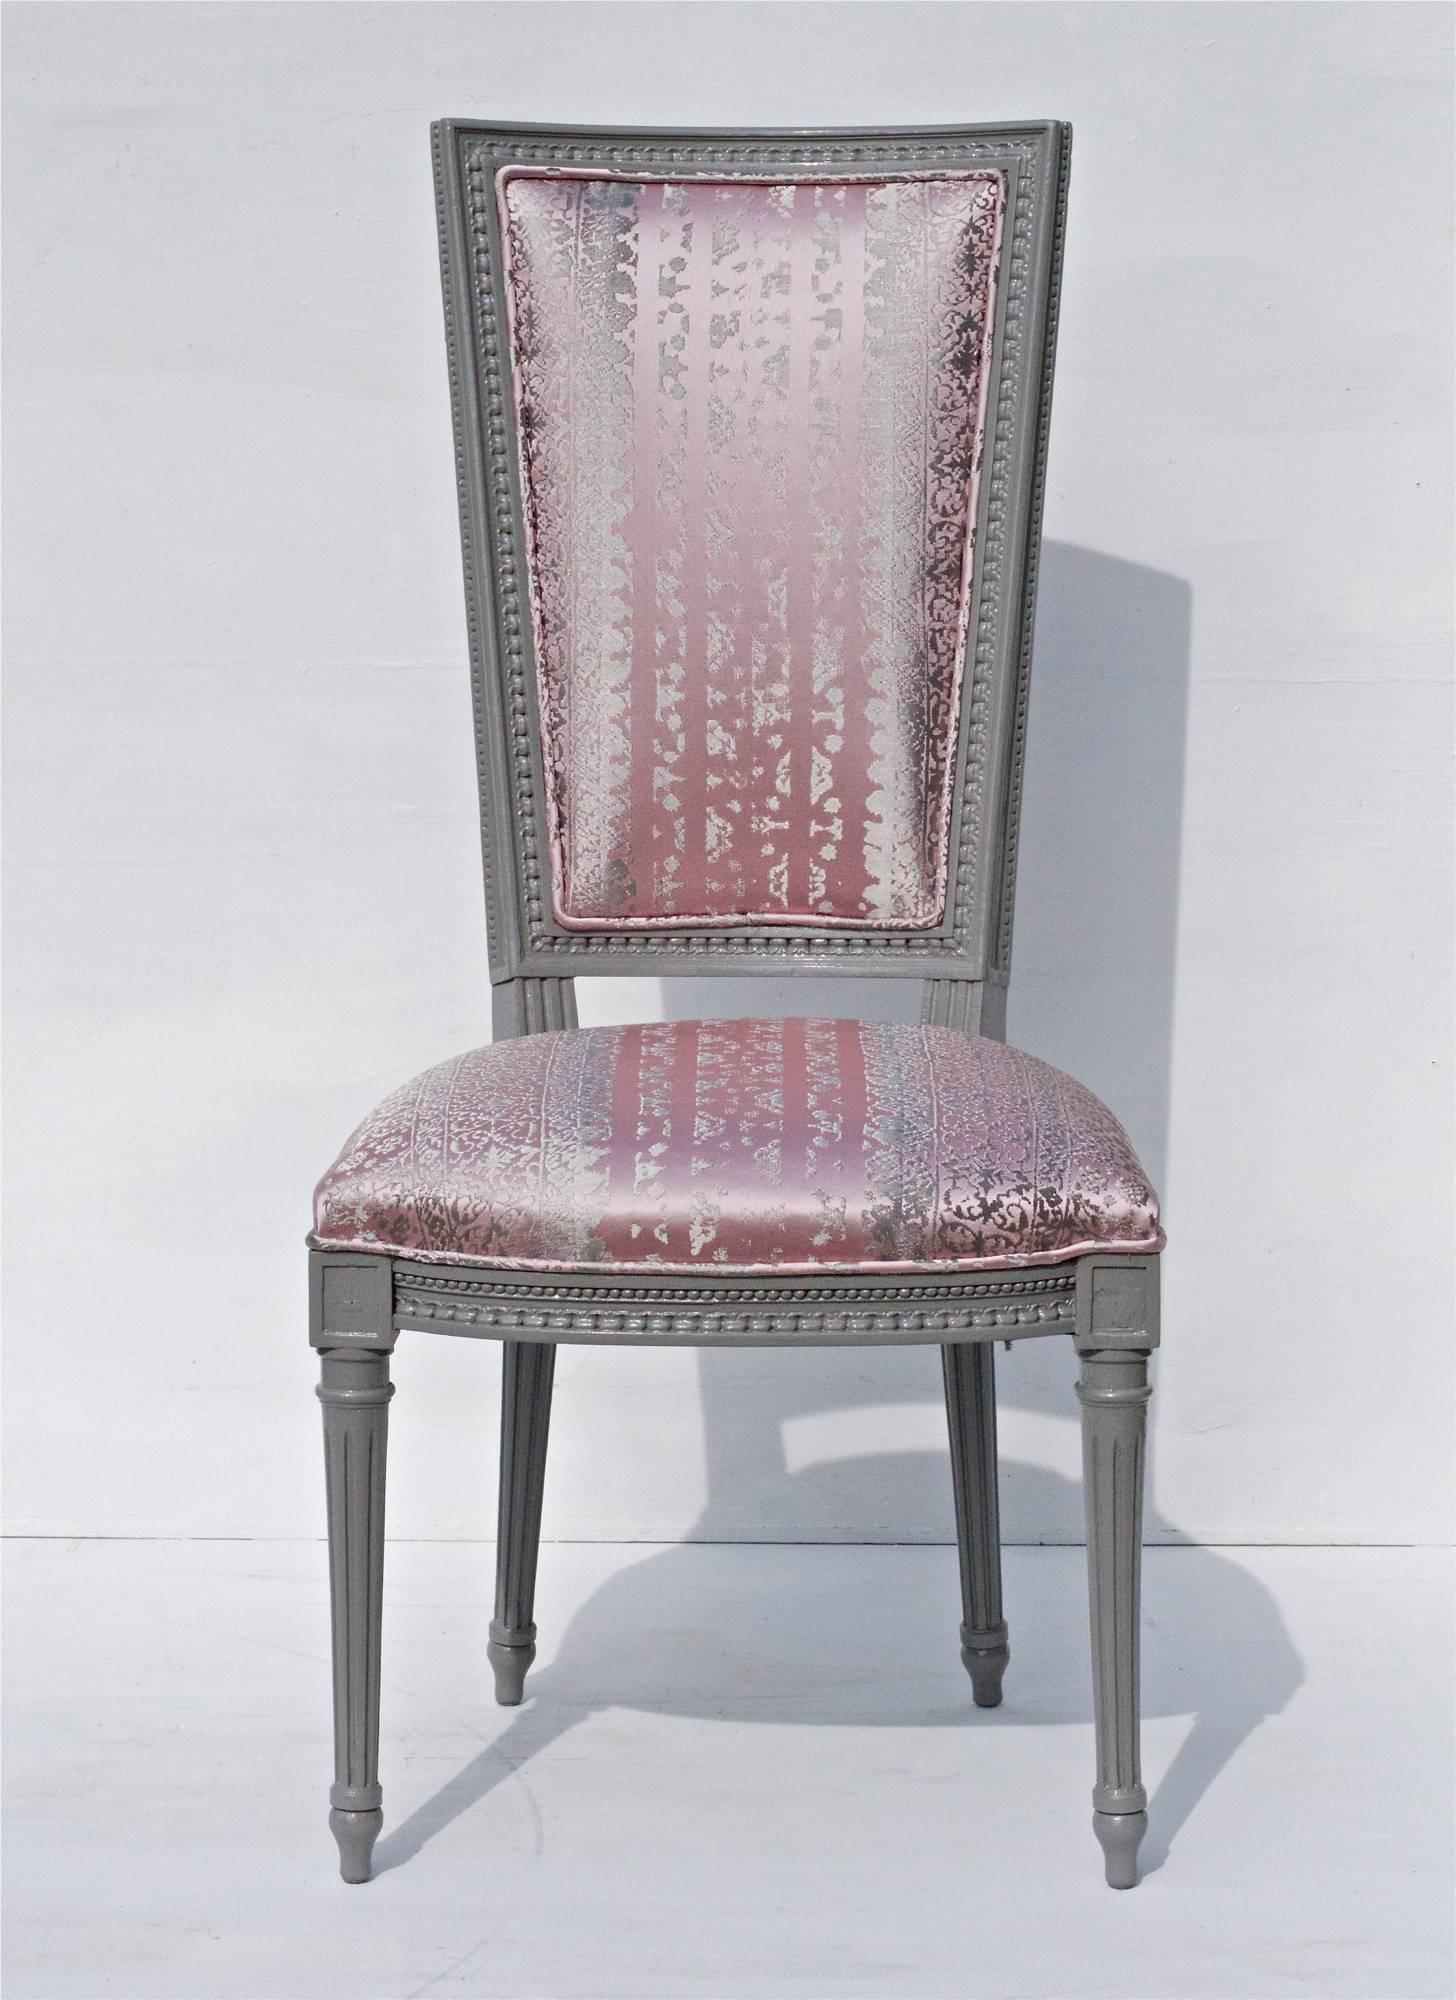 A stunning set of vintage Louis XVI high back dining chairs hand lacquered in fine paints of Europe Holland Lac and dressed up in a silk / satin blended fabric by Donghia. The high contrast combination of grey and pink tones is a feast for the eyes